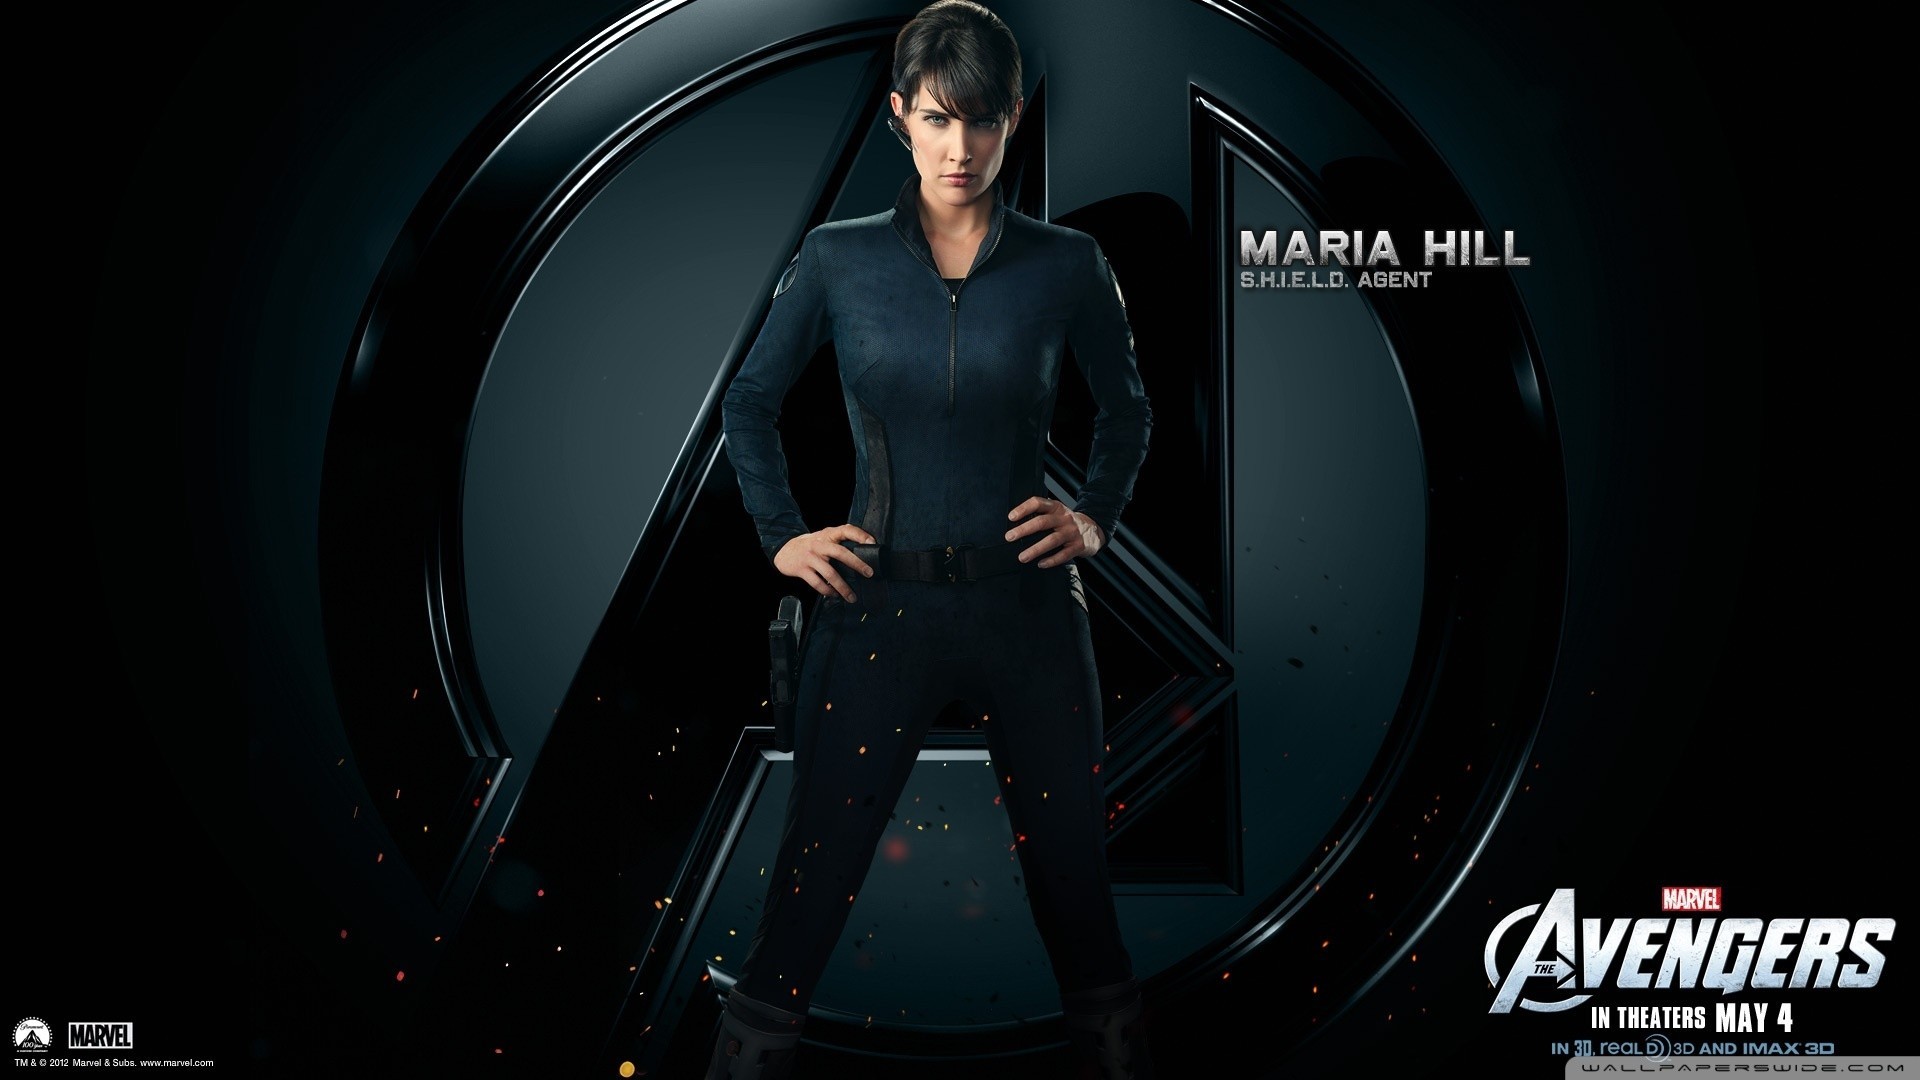 General 1920x1080 movies The Avengers Maria Hill Cobie Smulders S.H.I.E.L.D. hands on hips Marvel Cinematic Universe Canadian women dark hair standing Marvel Comics